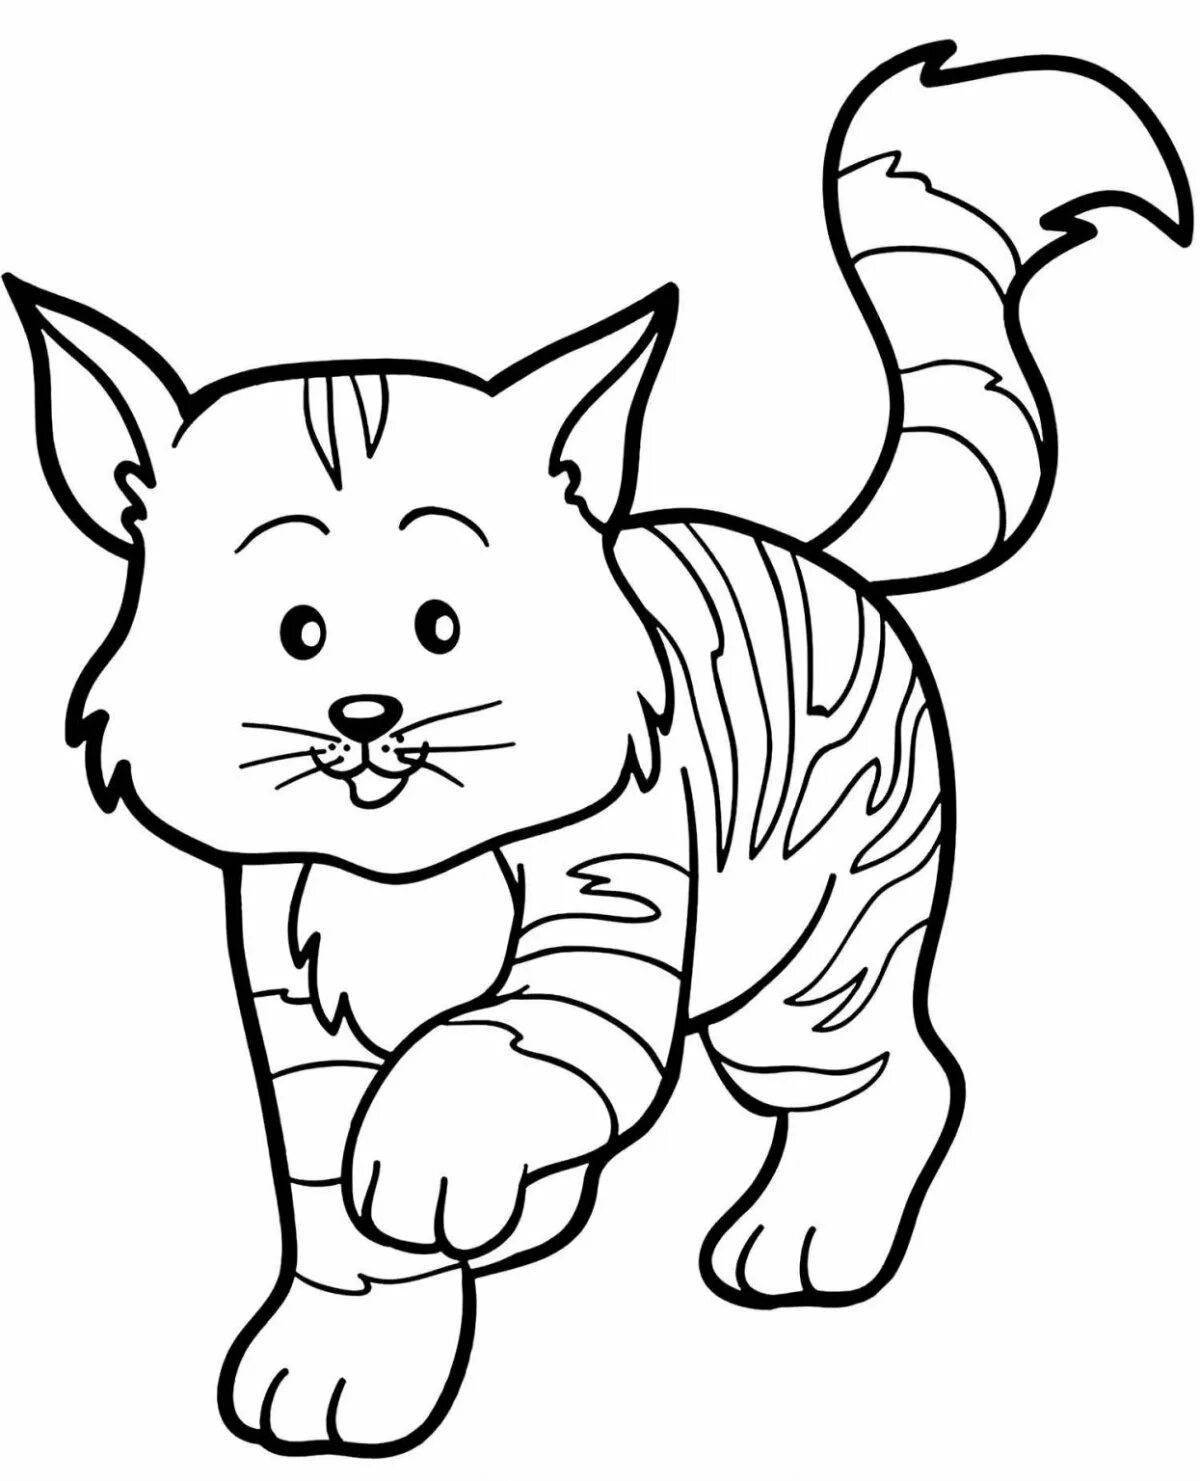 Coloring page sweet tabby cat